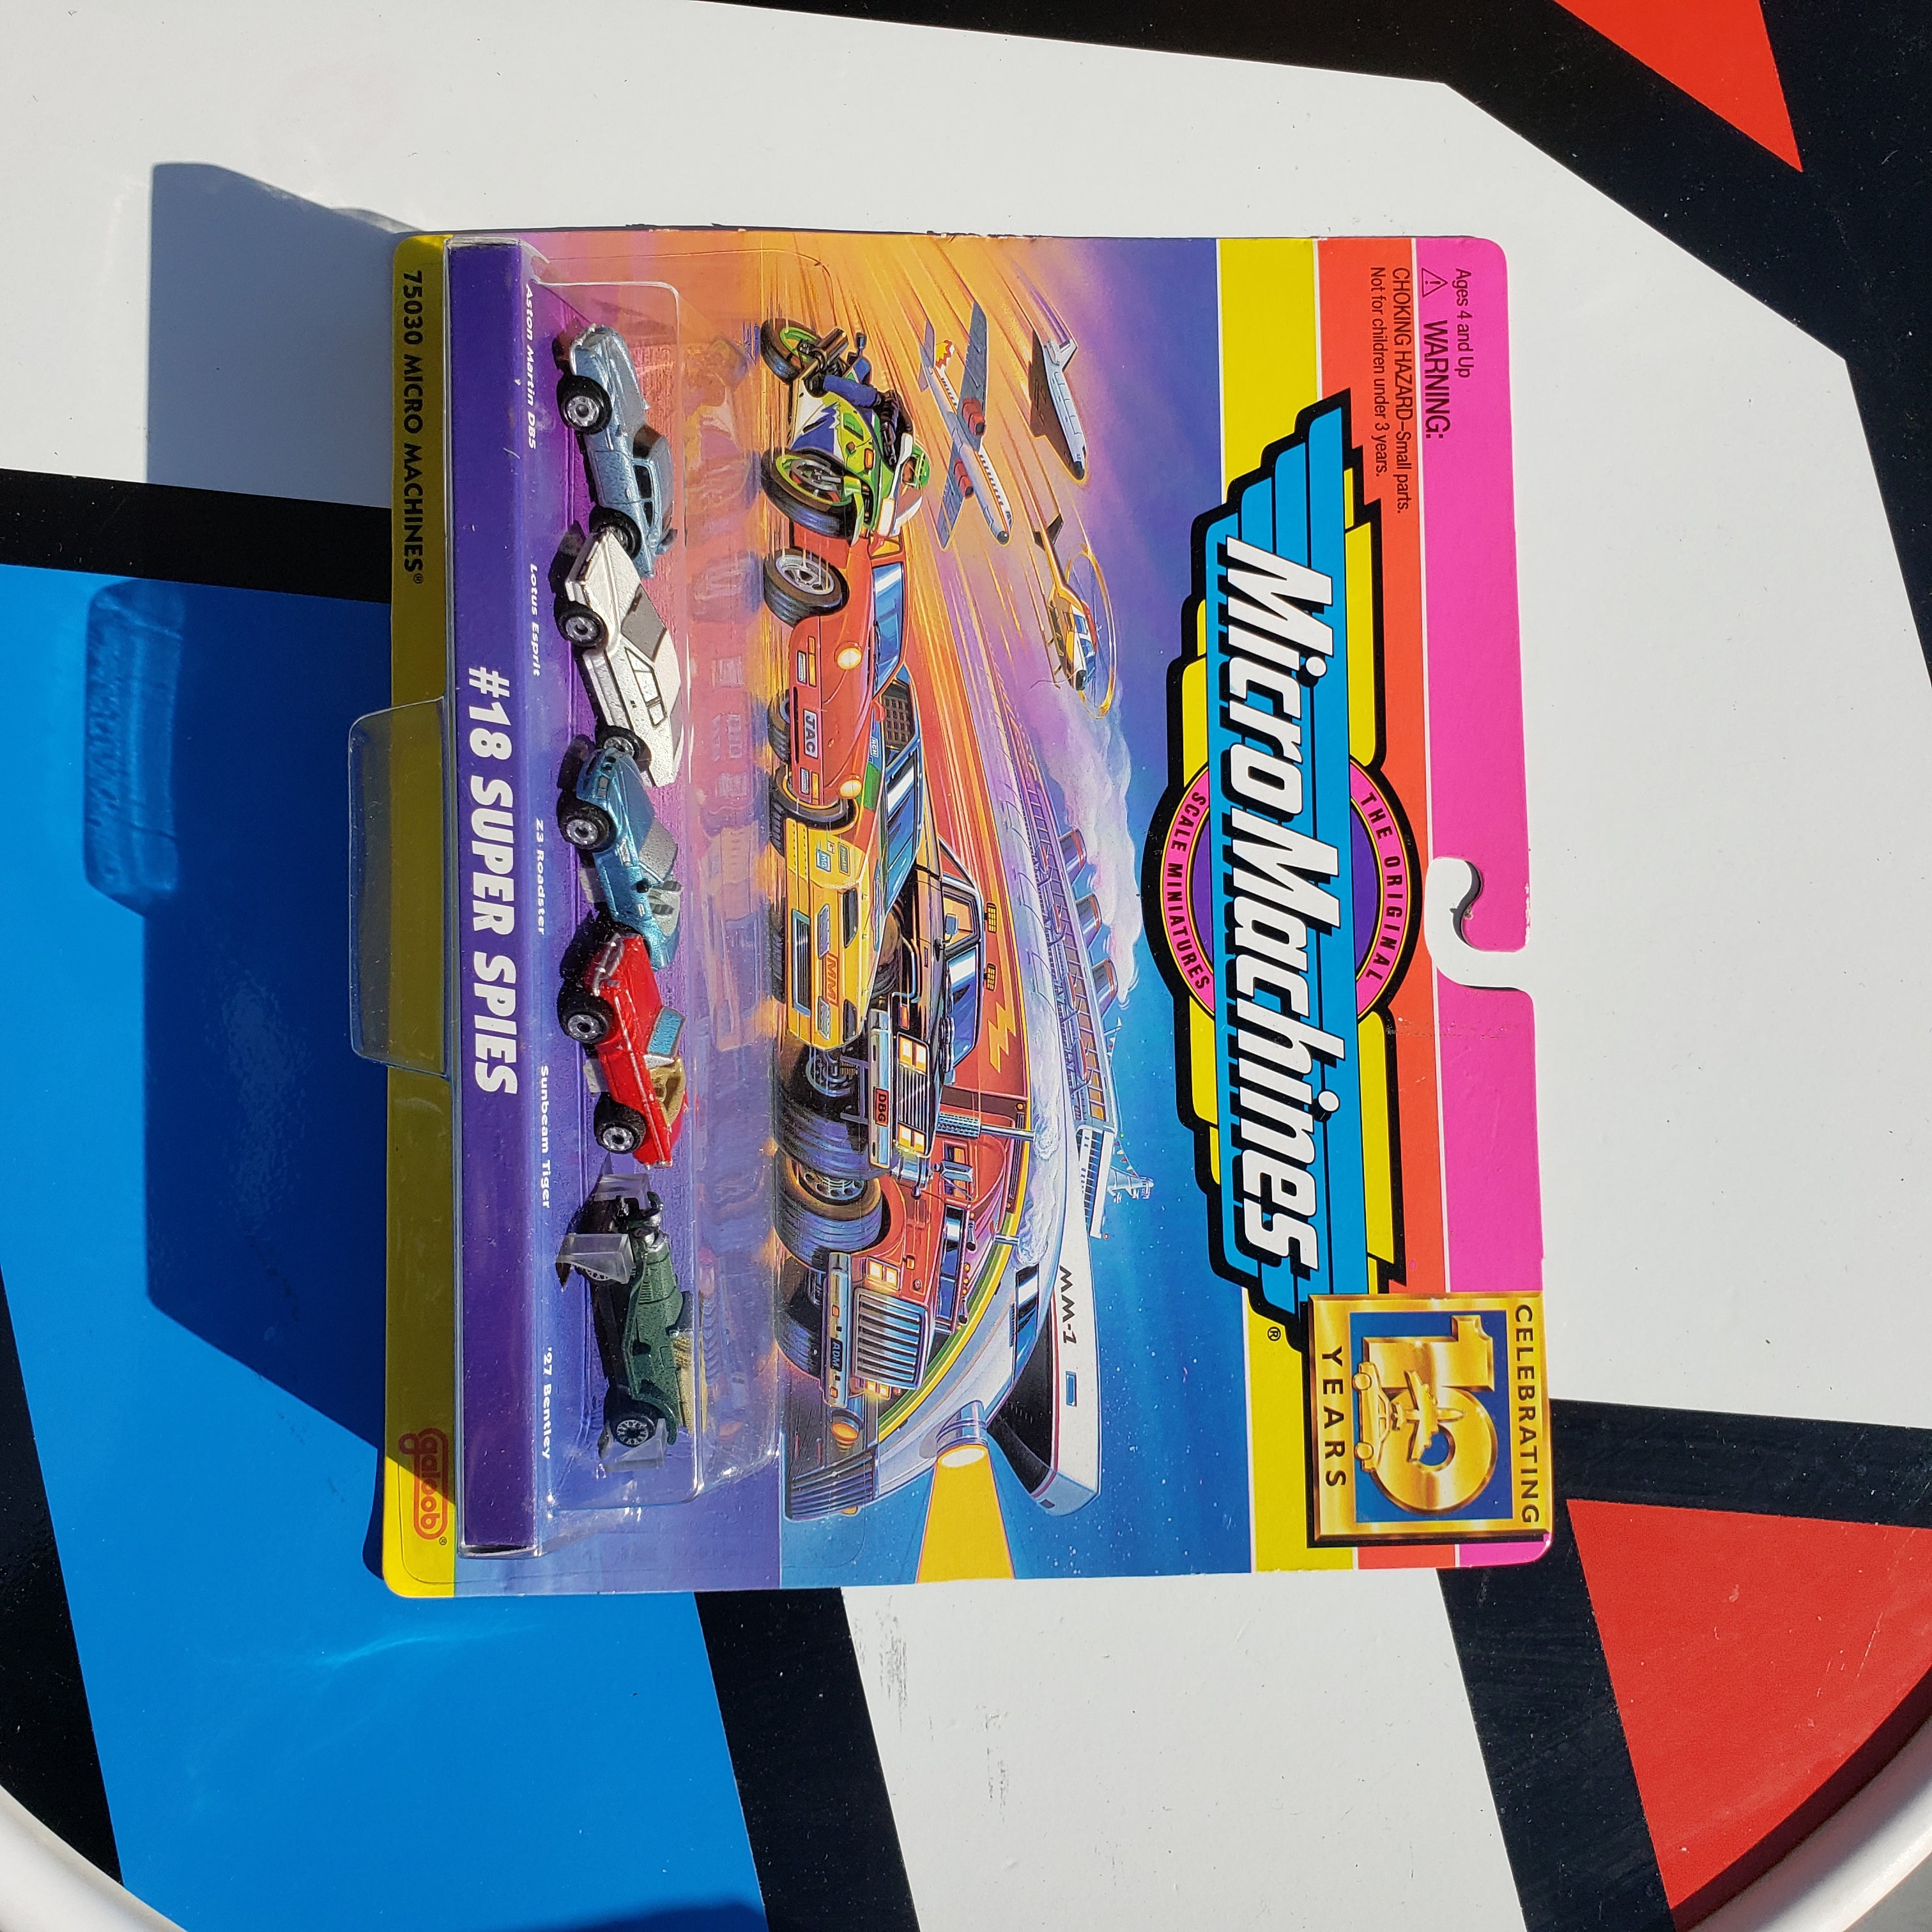 Micro Machines: new website catalogues the tiny toy cars